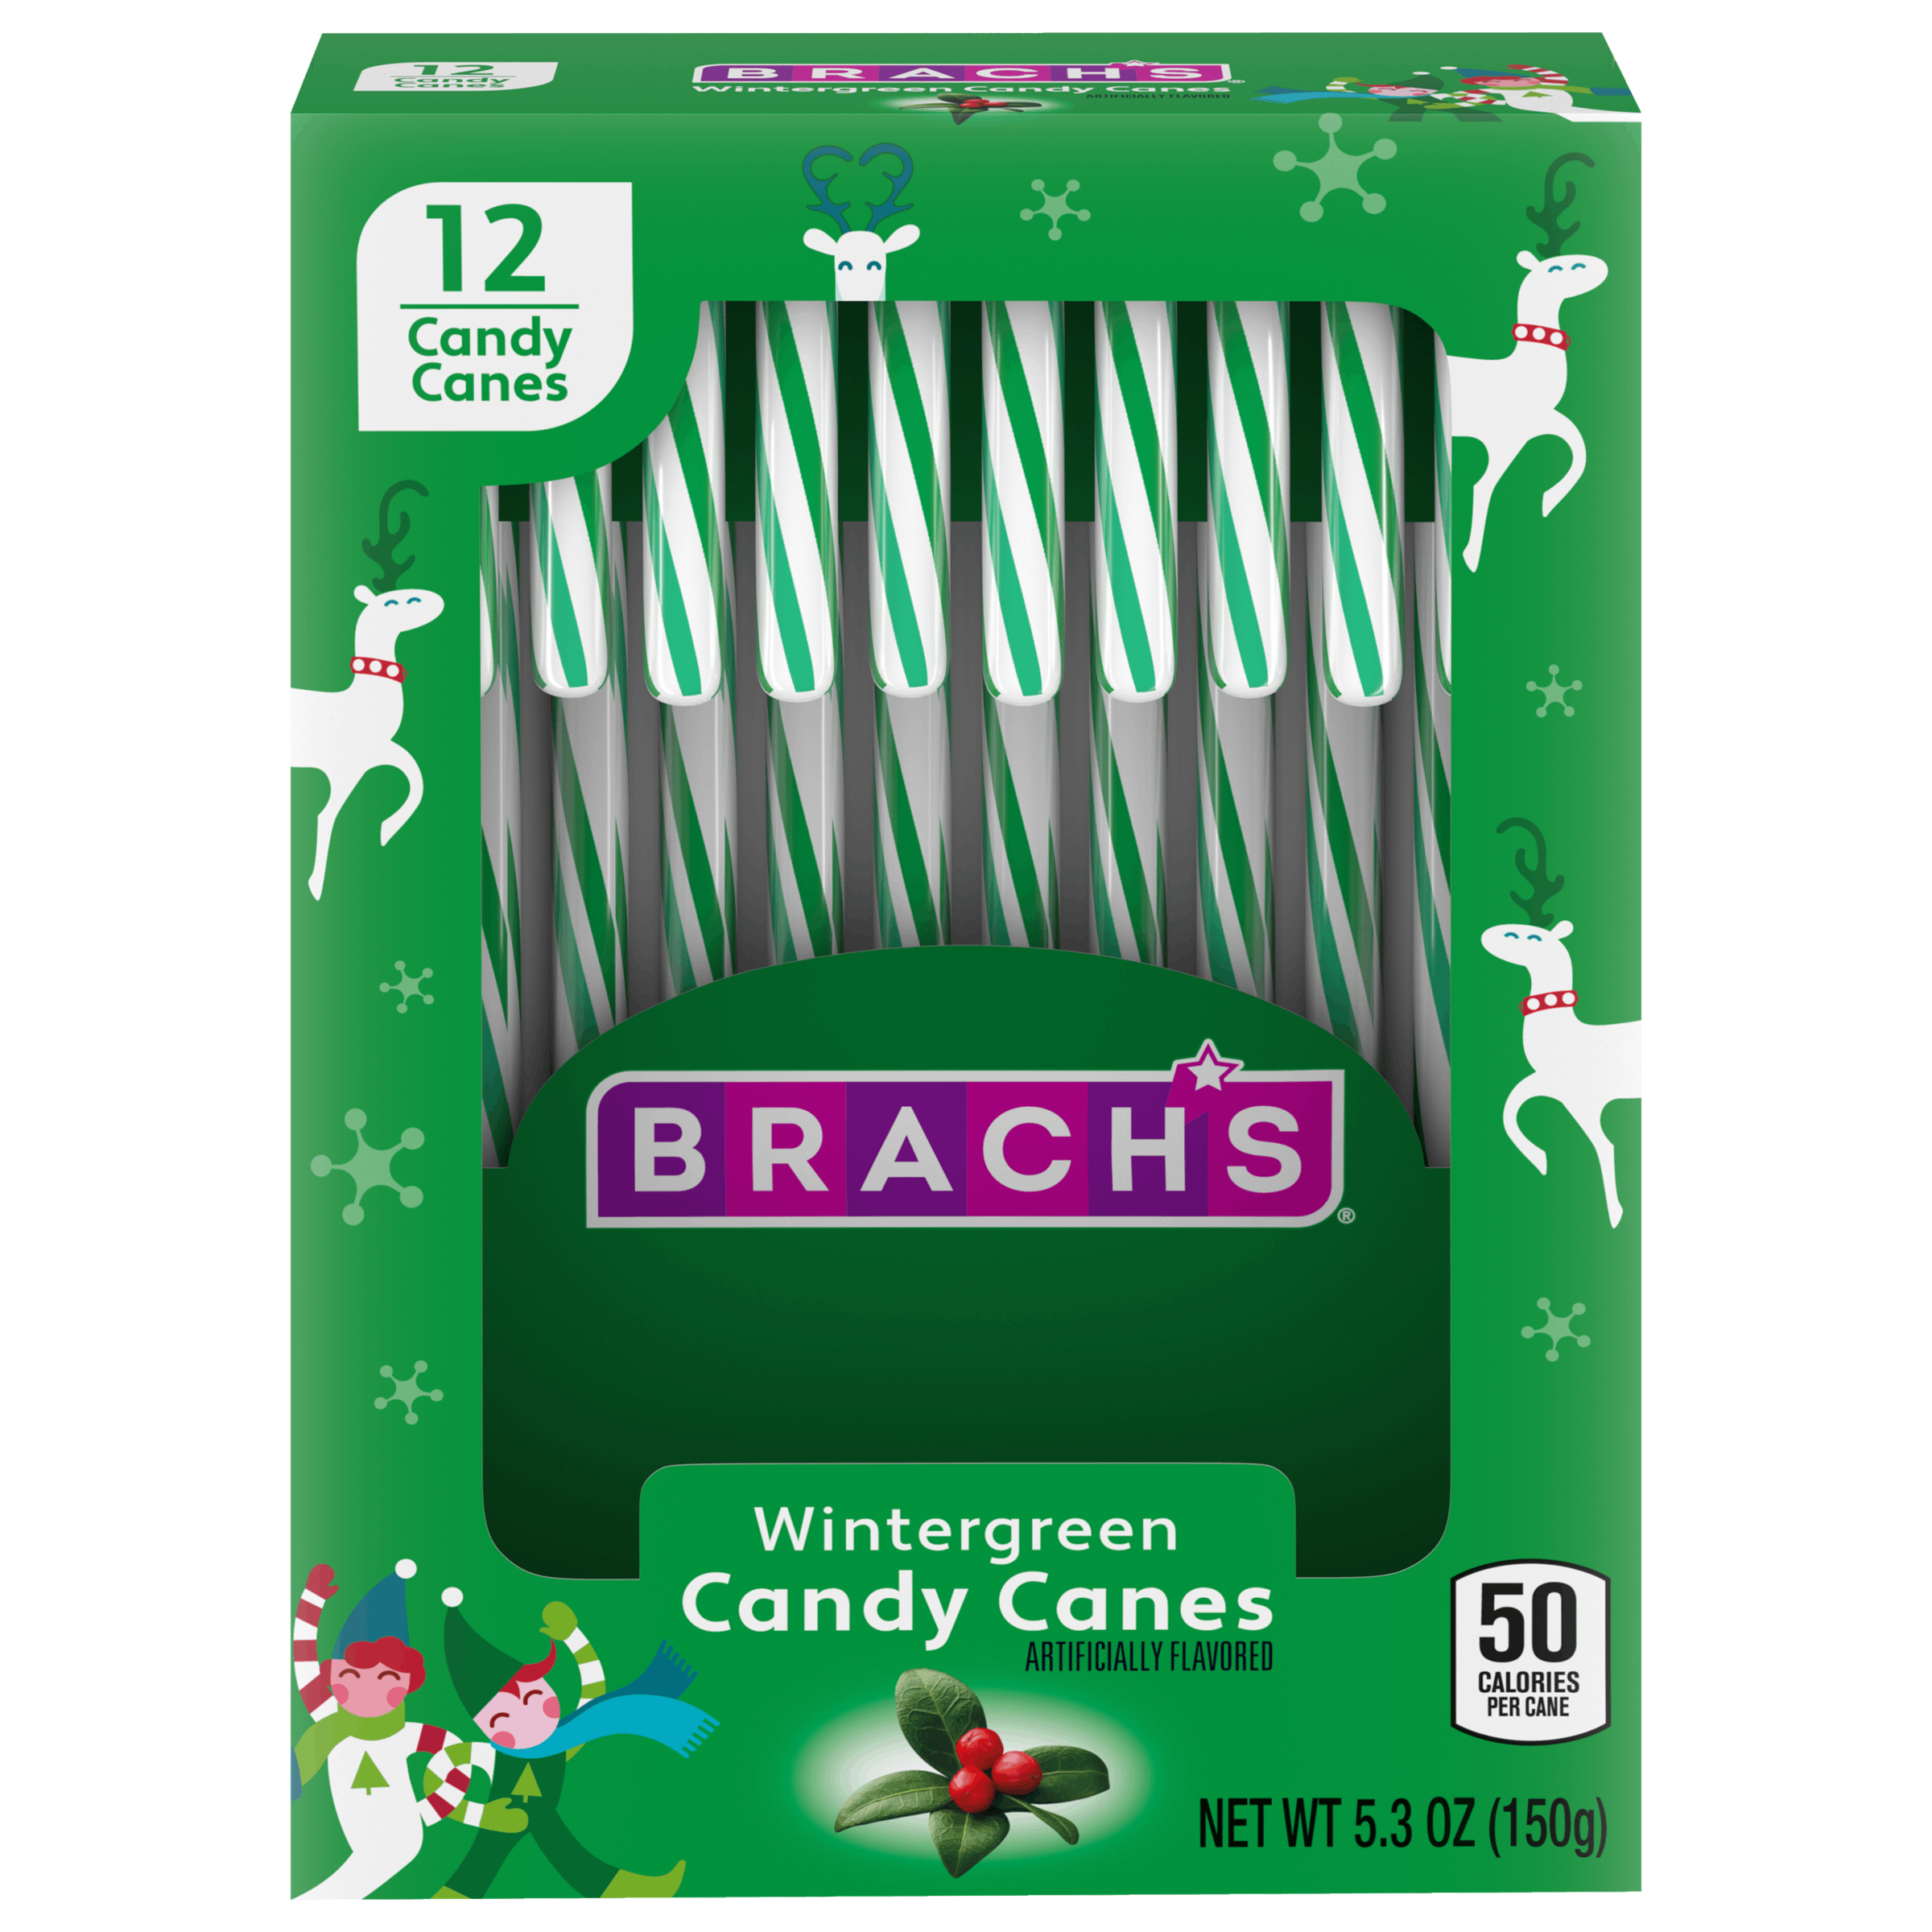 Product - Wintergreen Candy Canes